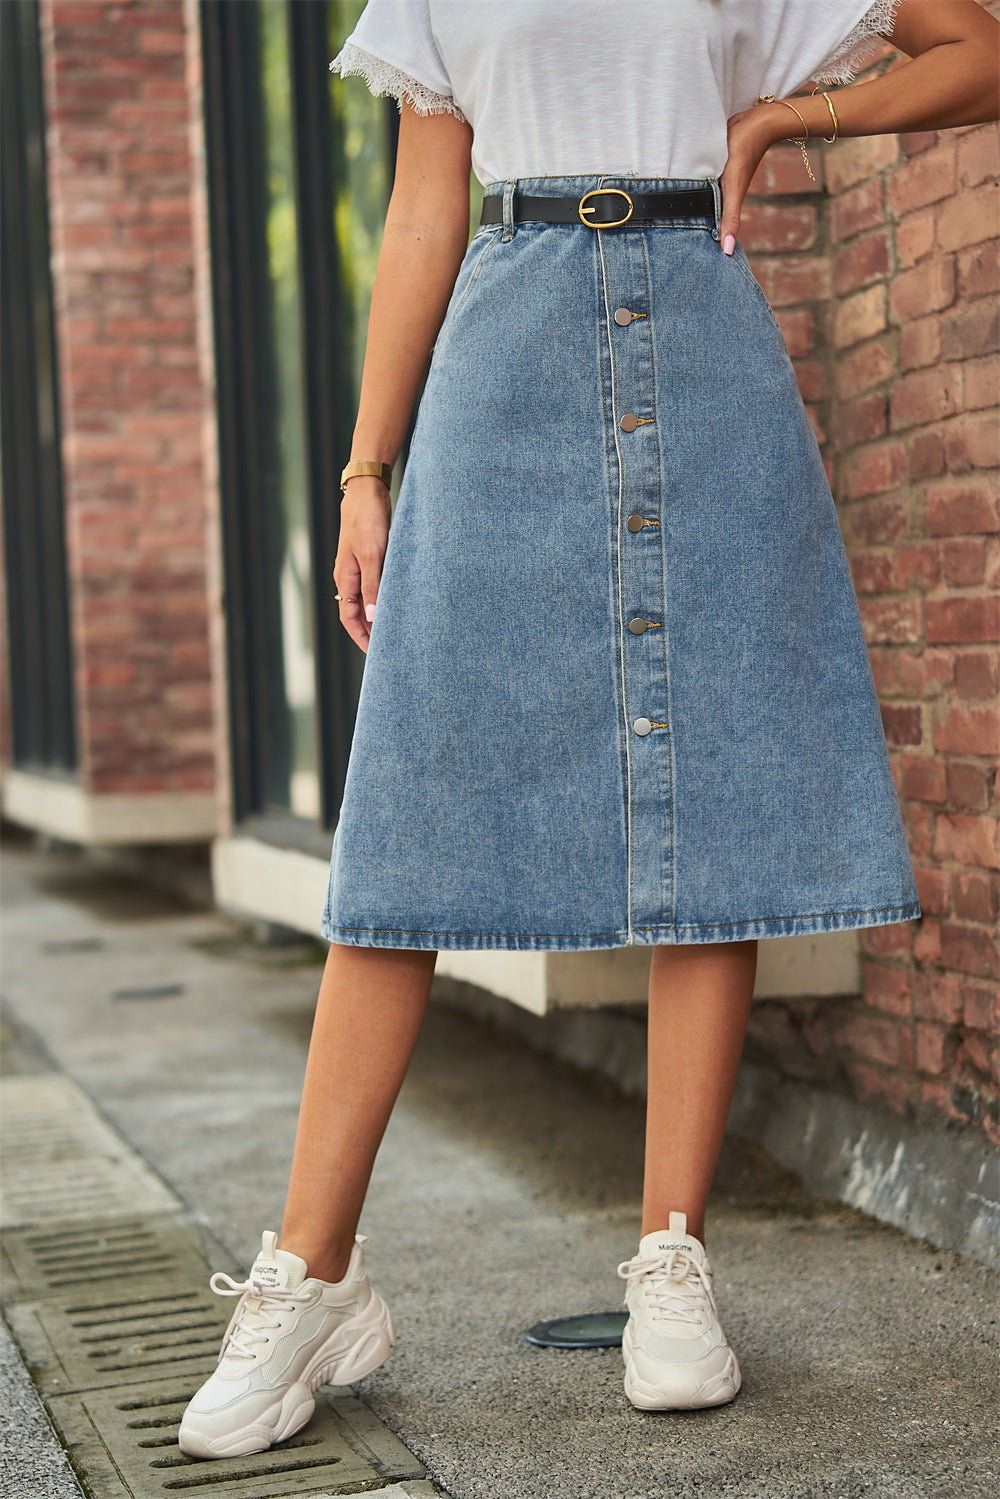 These Denim Skirt Outfits Will Make You Become A Headturner - Just The  Design | Jupe jean femme, Jupe en jean, Mode femme